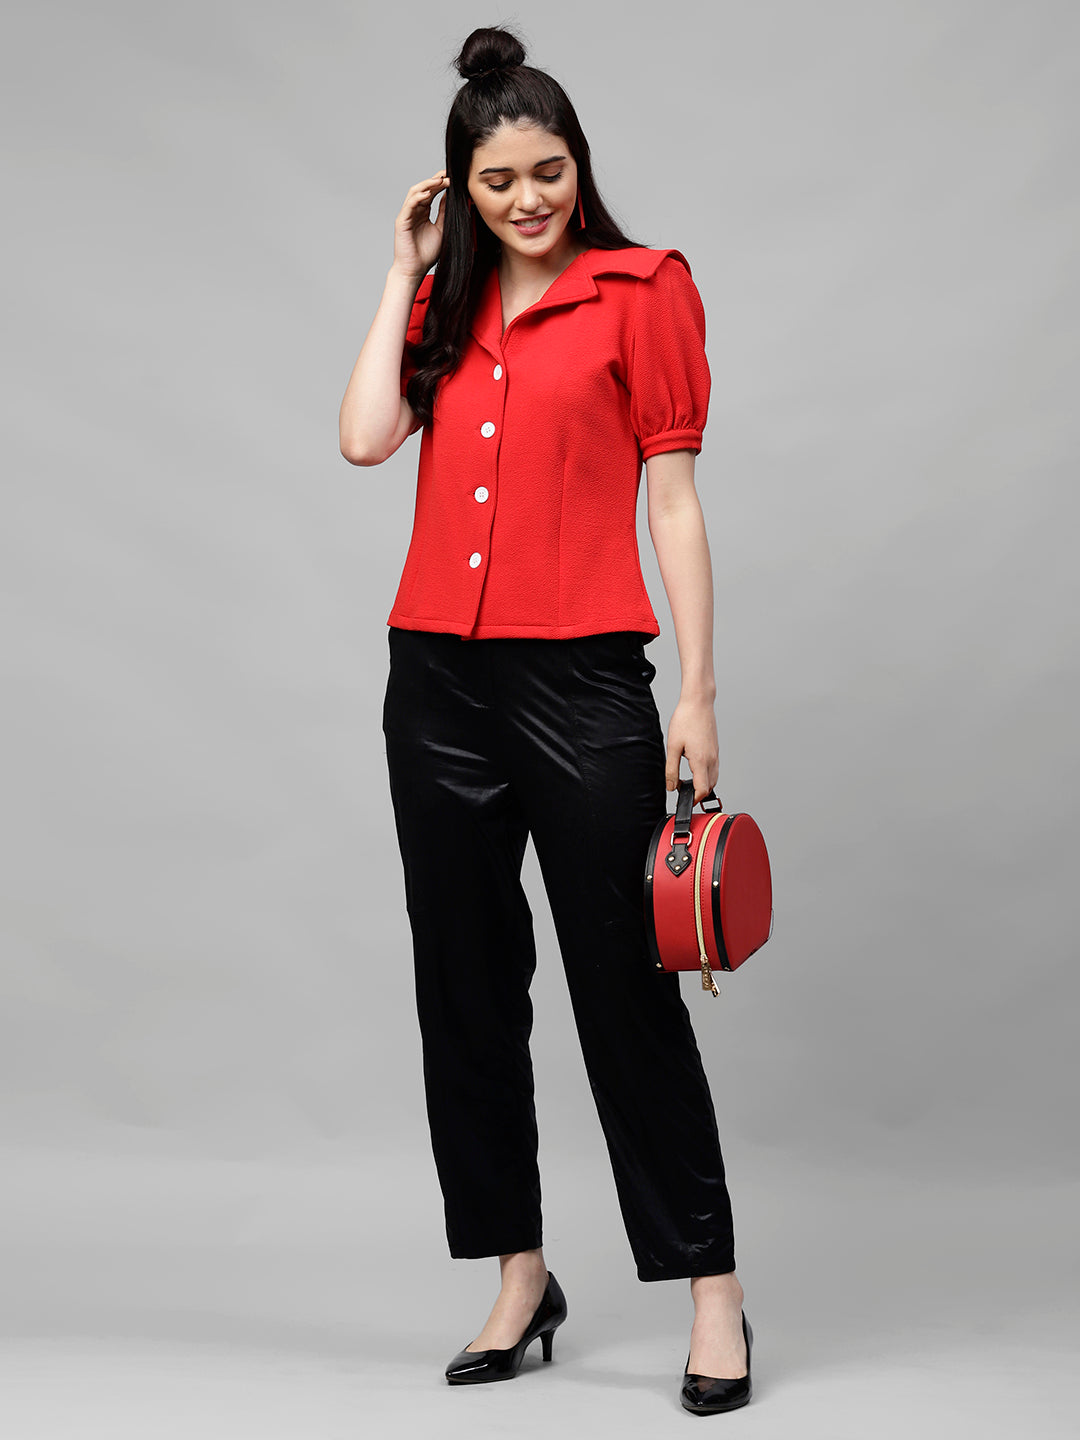 Athena Women Red Solid Shirt Style Top - Athena Lifestyle